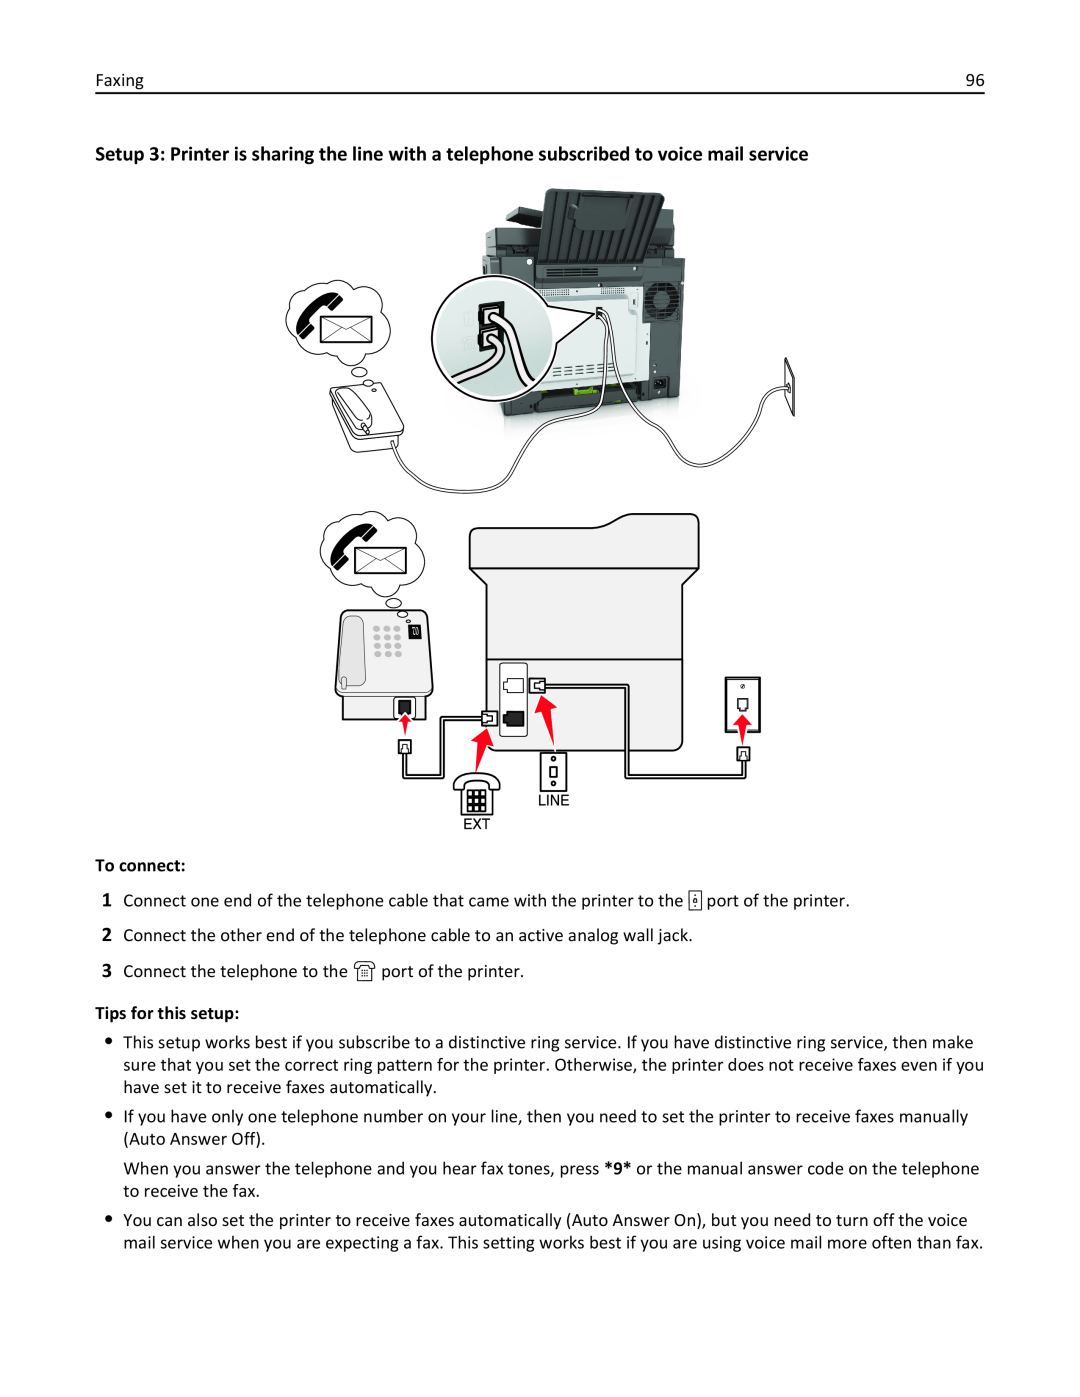 Lexmark 436 manual To connect, Tips for this setup 